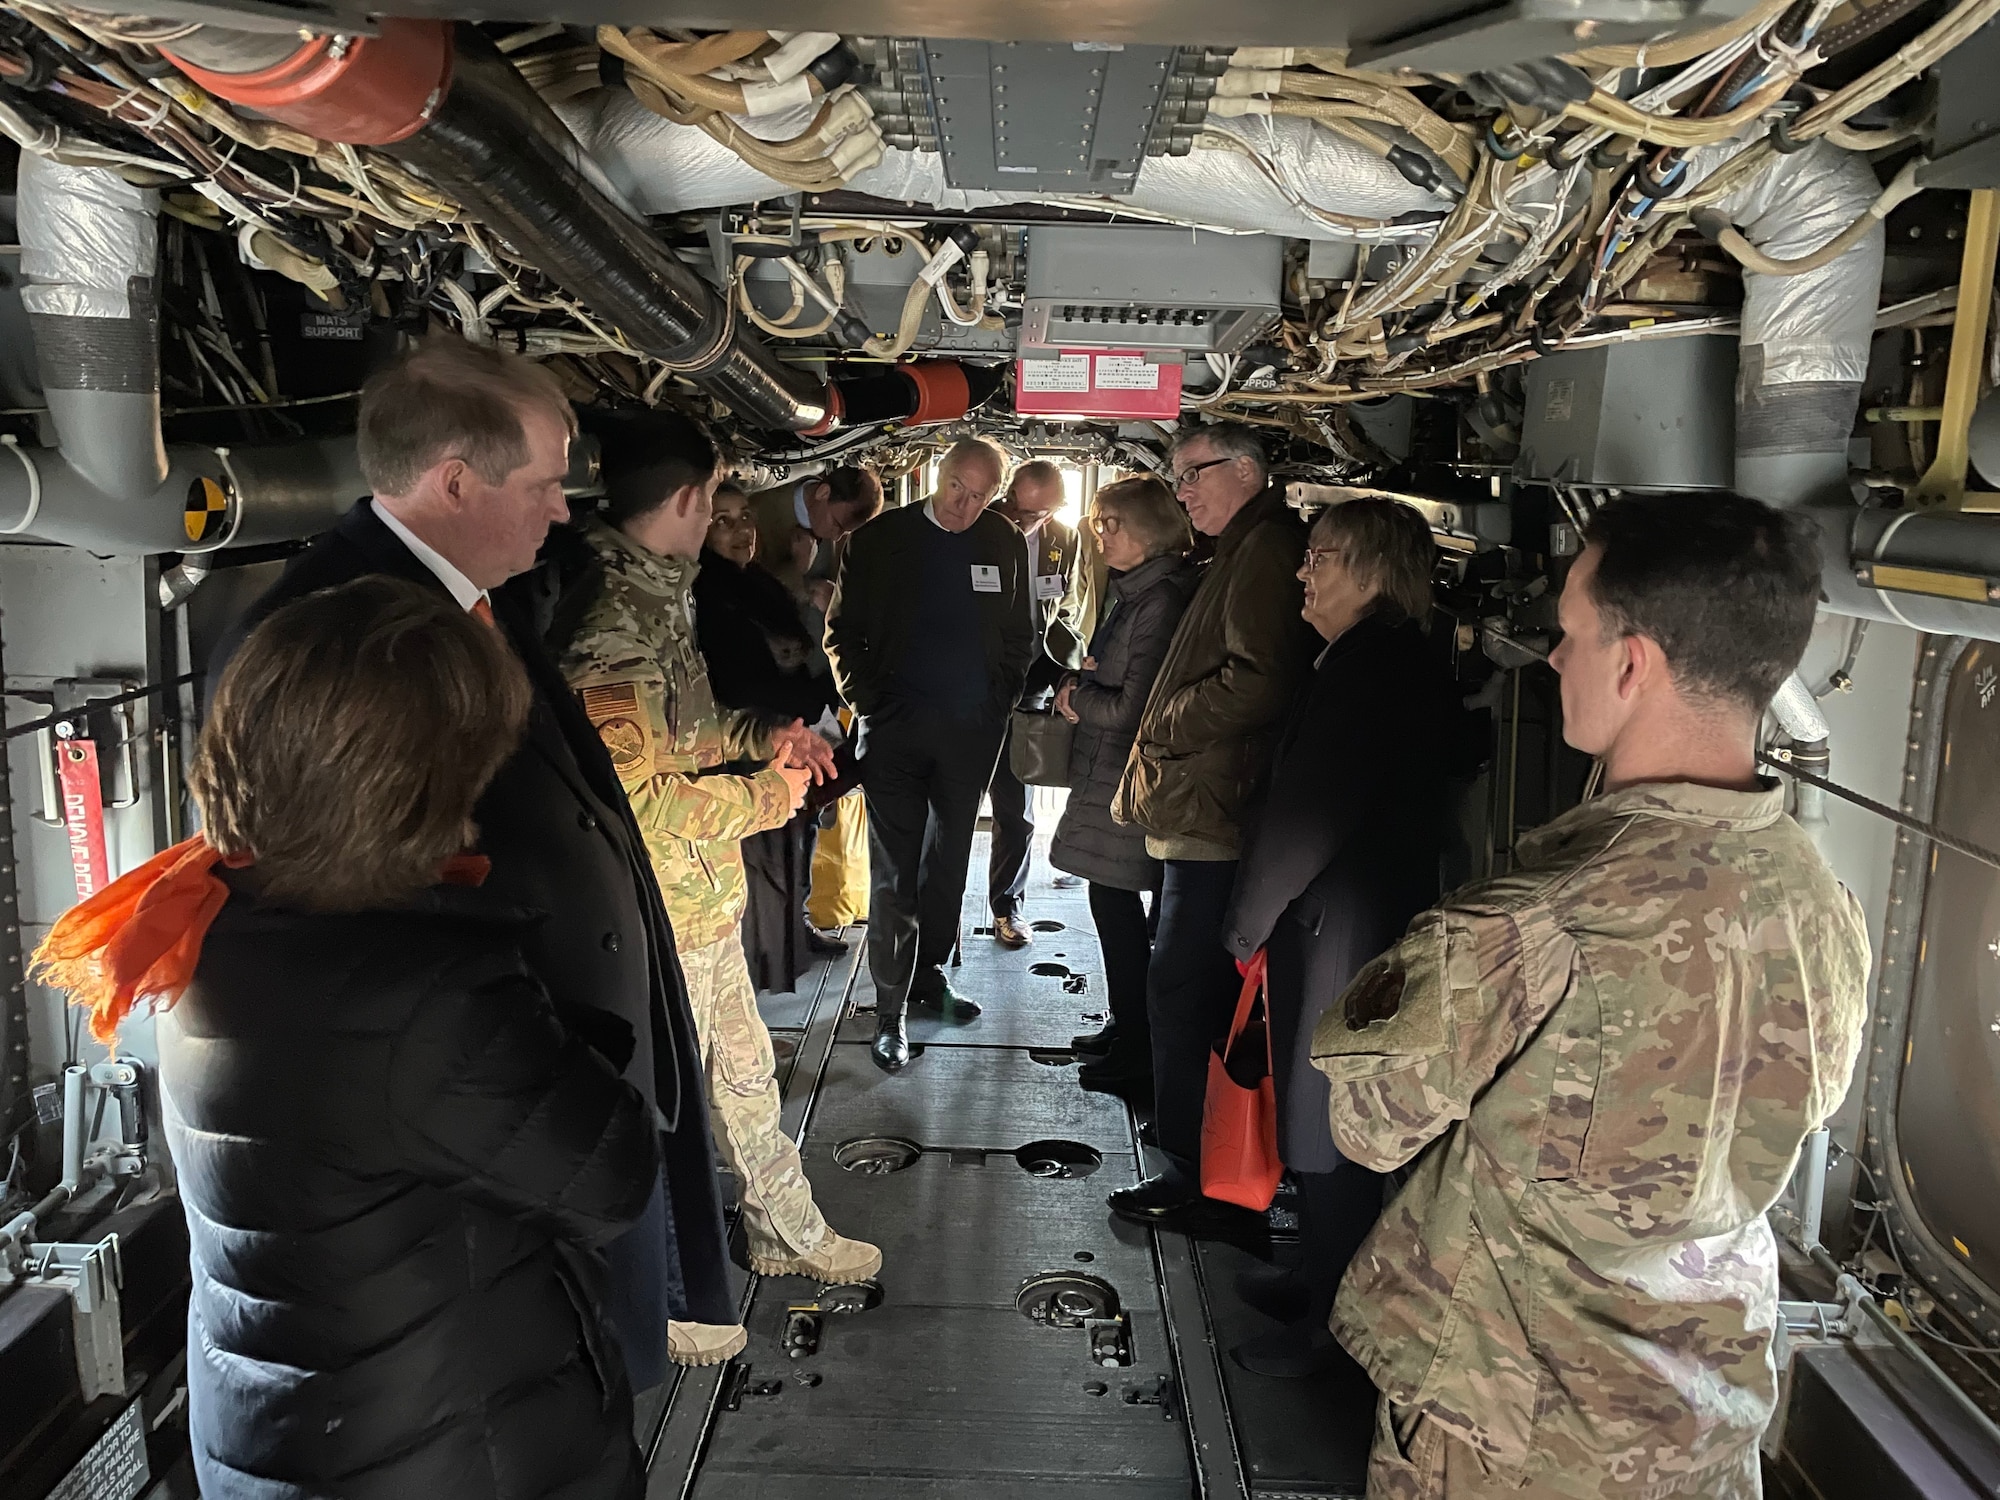 High sheriffs and deputy lieutenants from the Suffolk, Norfolk and Cambridgeshire counties of England listen to a briefing from Airmen assigned to the 352nd Special Operations Wing inside a CV-22B Osprey aircraft at Royal Air Force Mildenhall, England, Oct. 21, 2021. The high sheriffs and deputy lieutenants toured the base as part of a familiarization visit to learn about Team Mildenhall's mission sets and global impact. (U.S. Air Force photo by Senior Airman Joseph Barron)